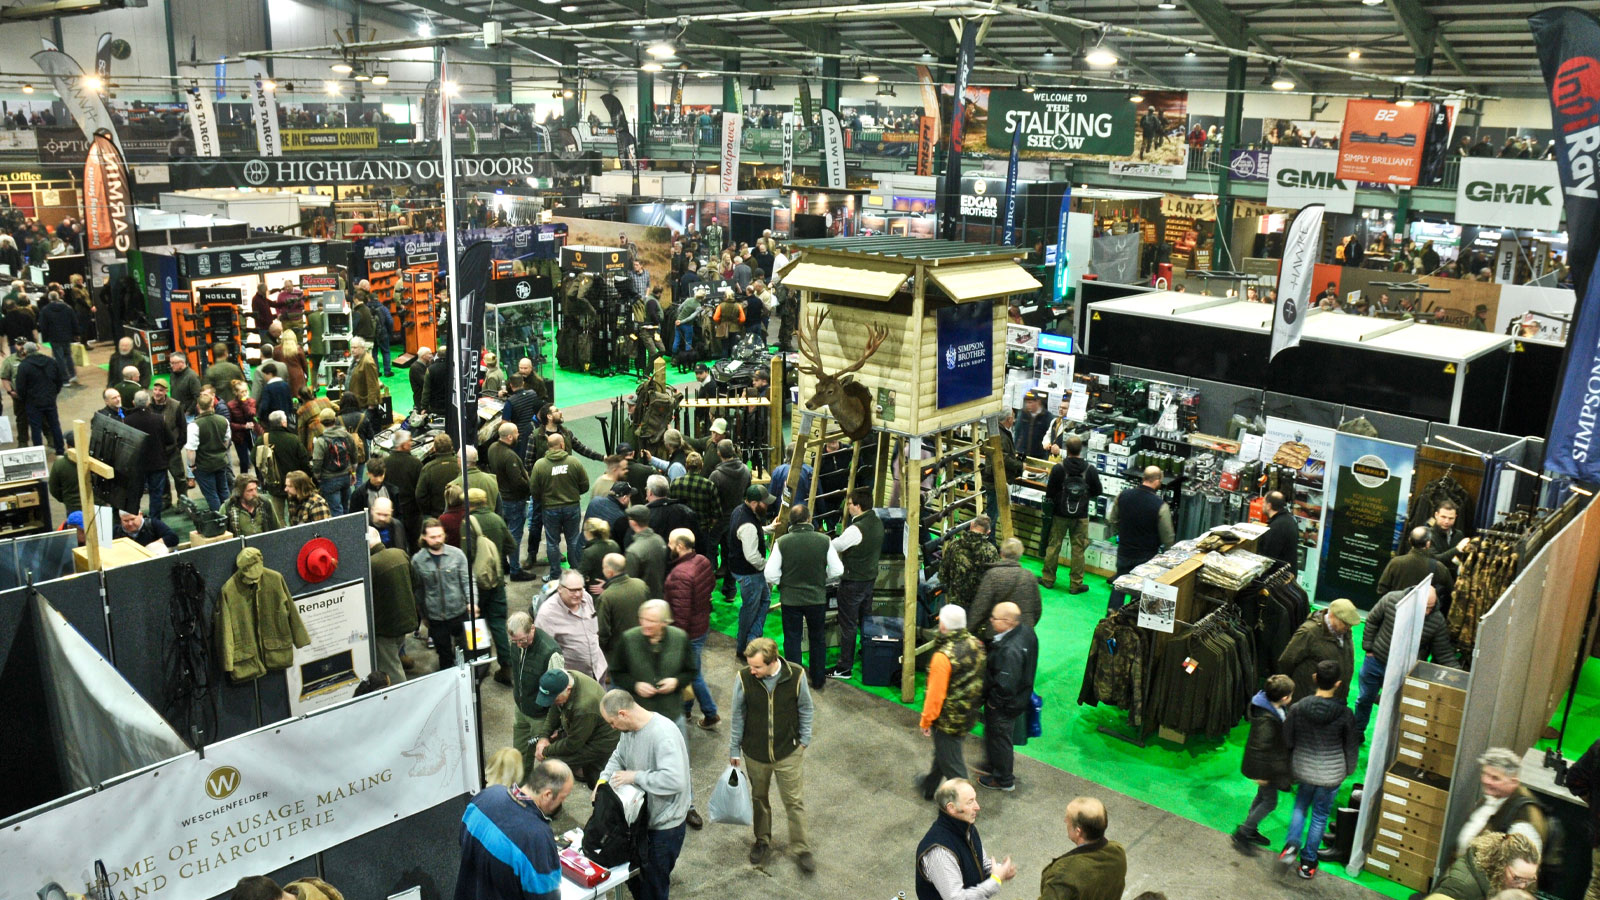 Visitors look at products on offer at The Stalking Show